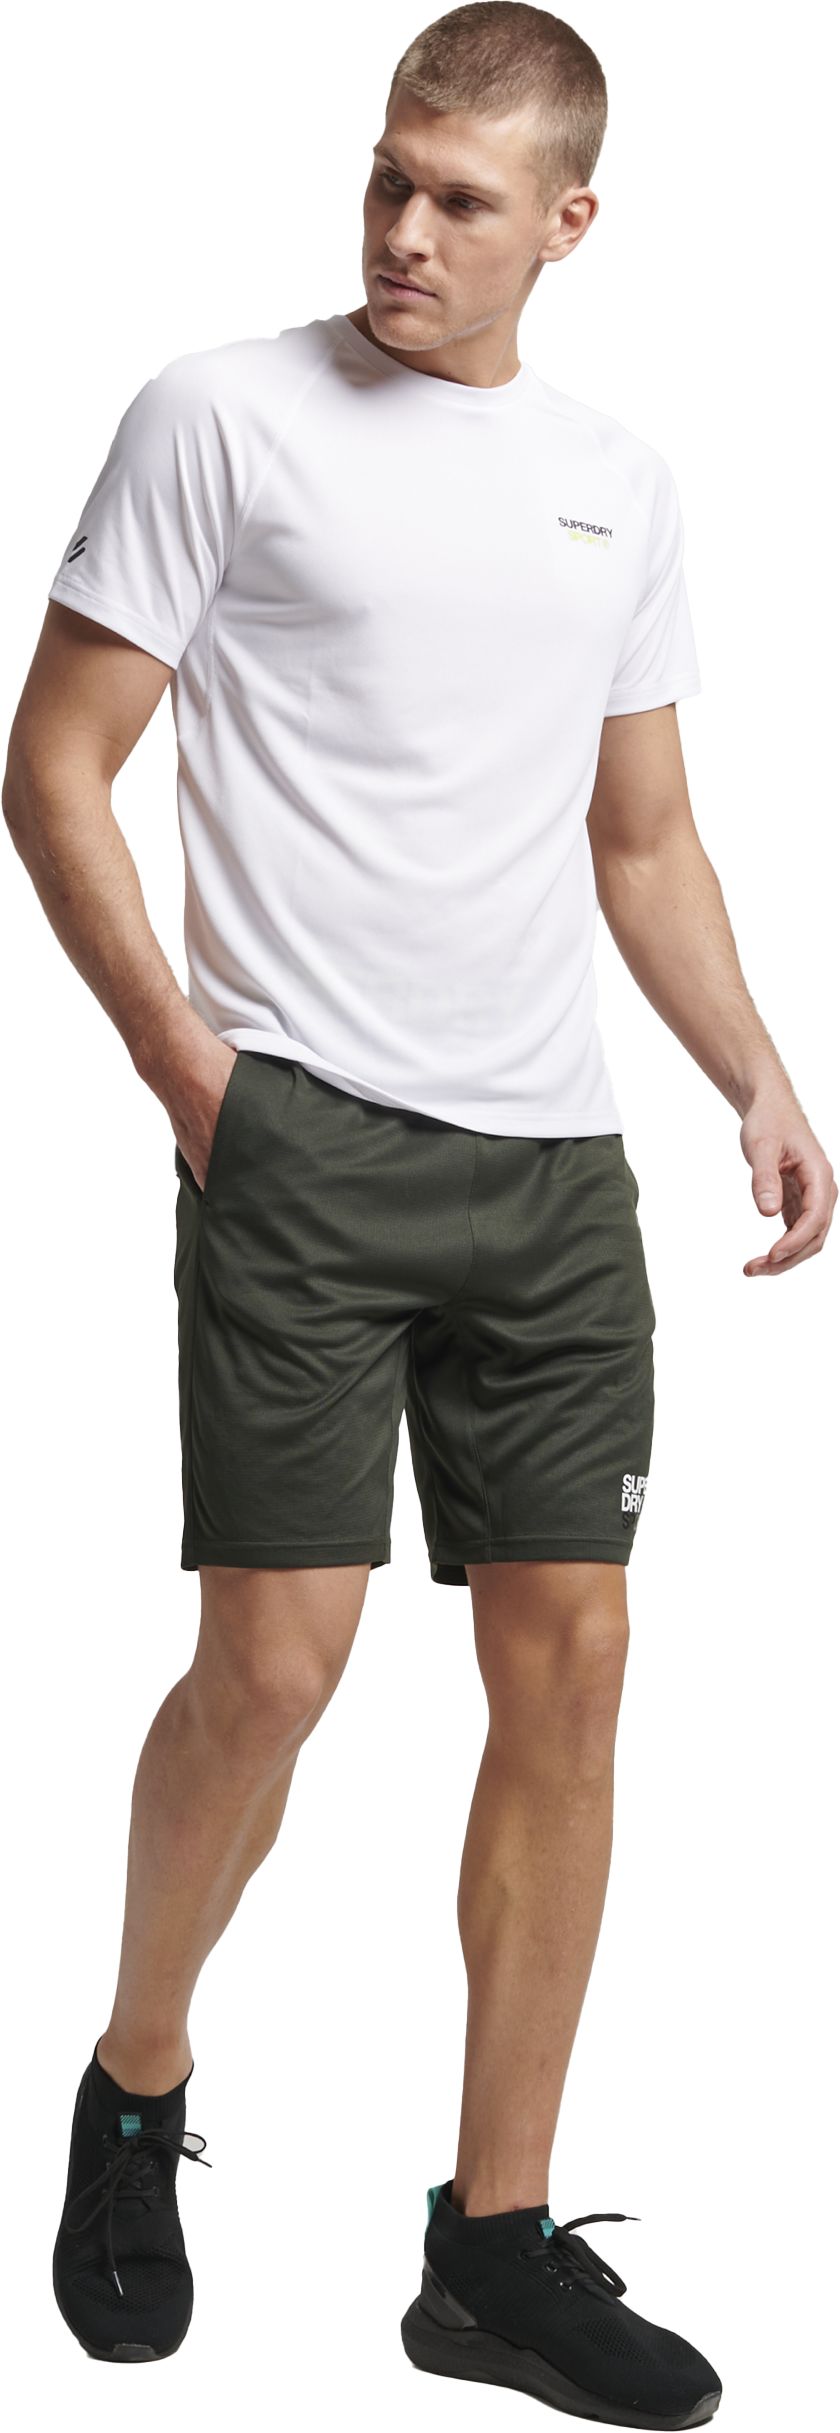 SUPERDRY, CORE RELAXED SHORTS